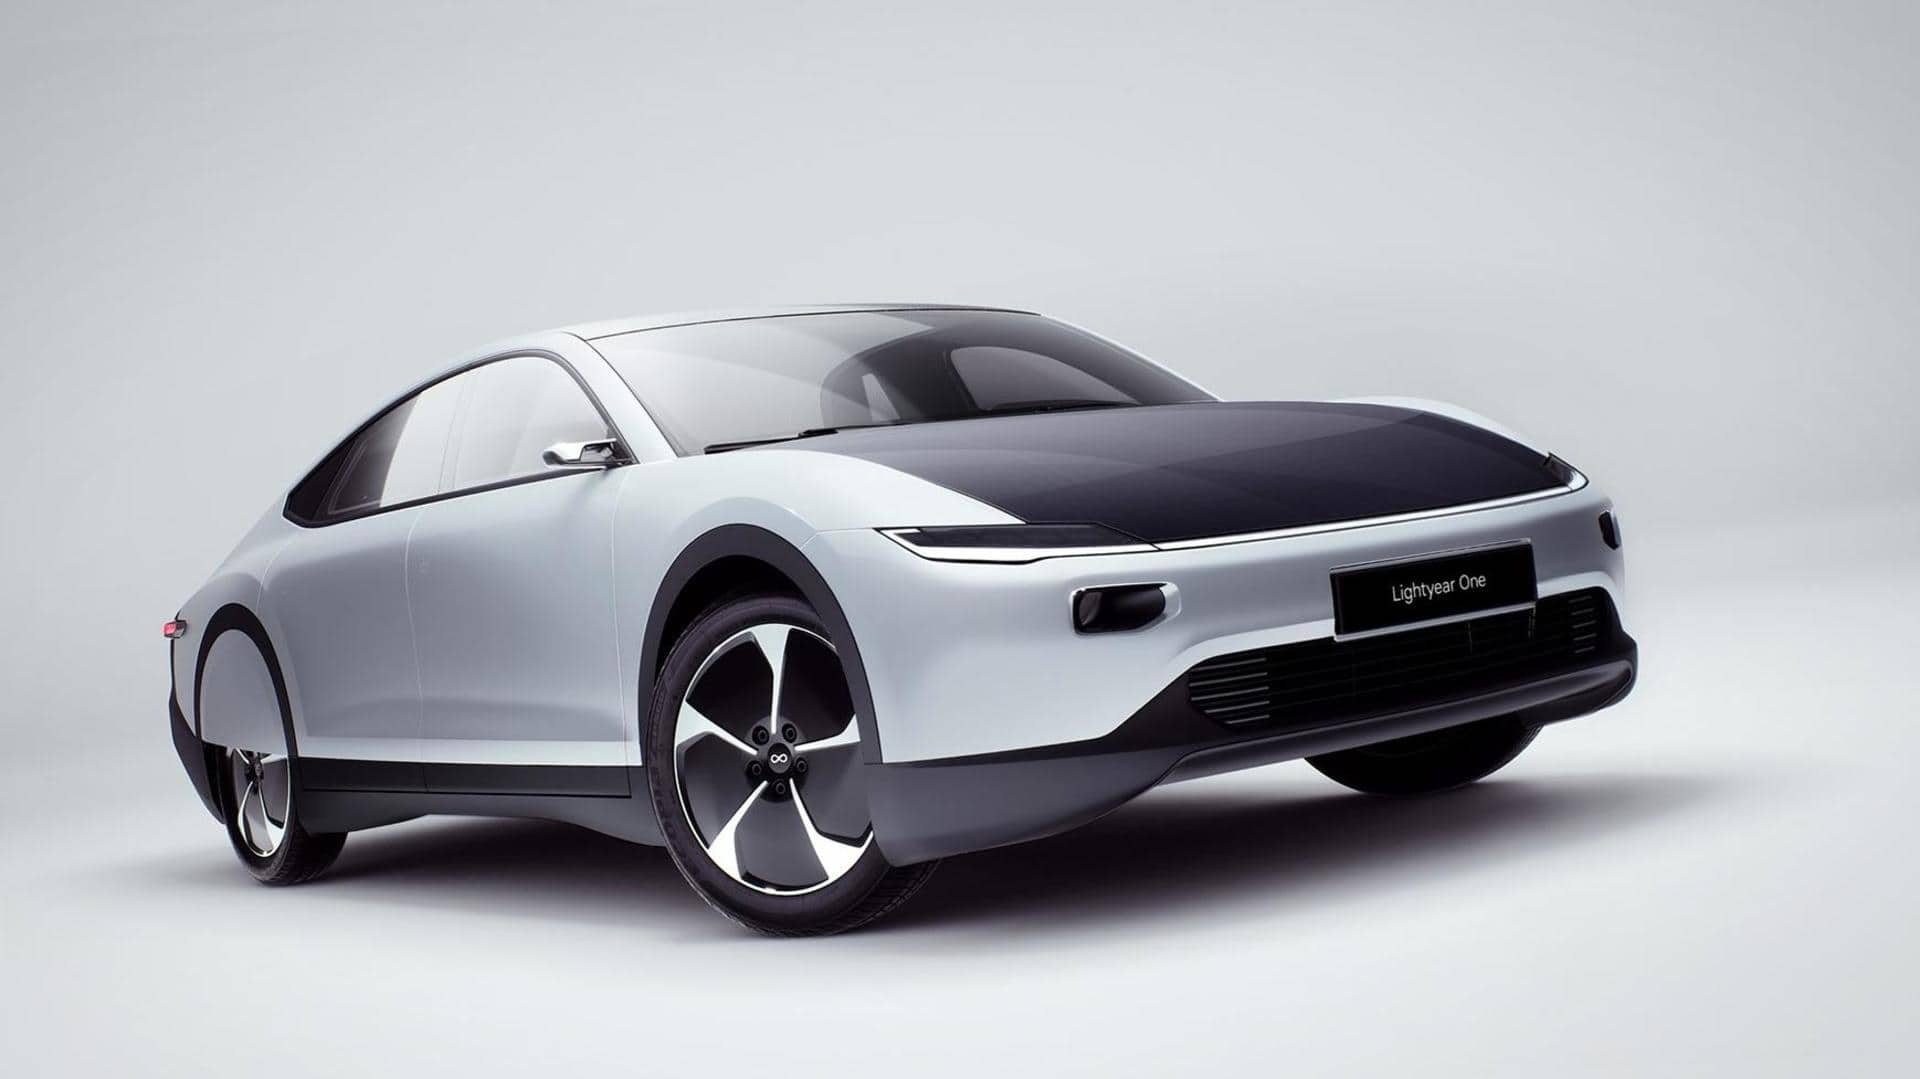 World's first solar-powered car, Lightyear 0, heads to production